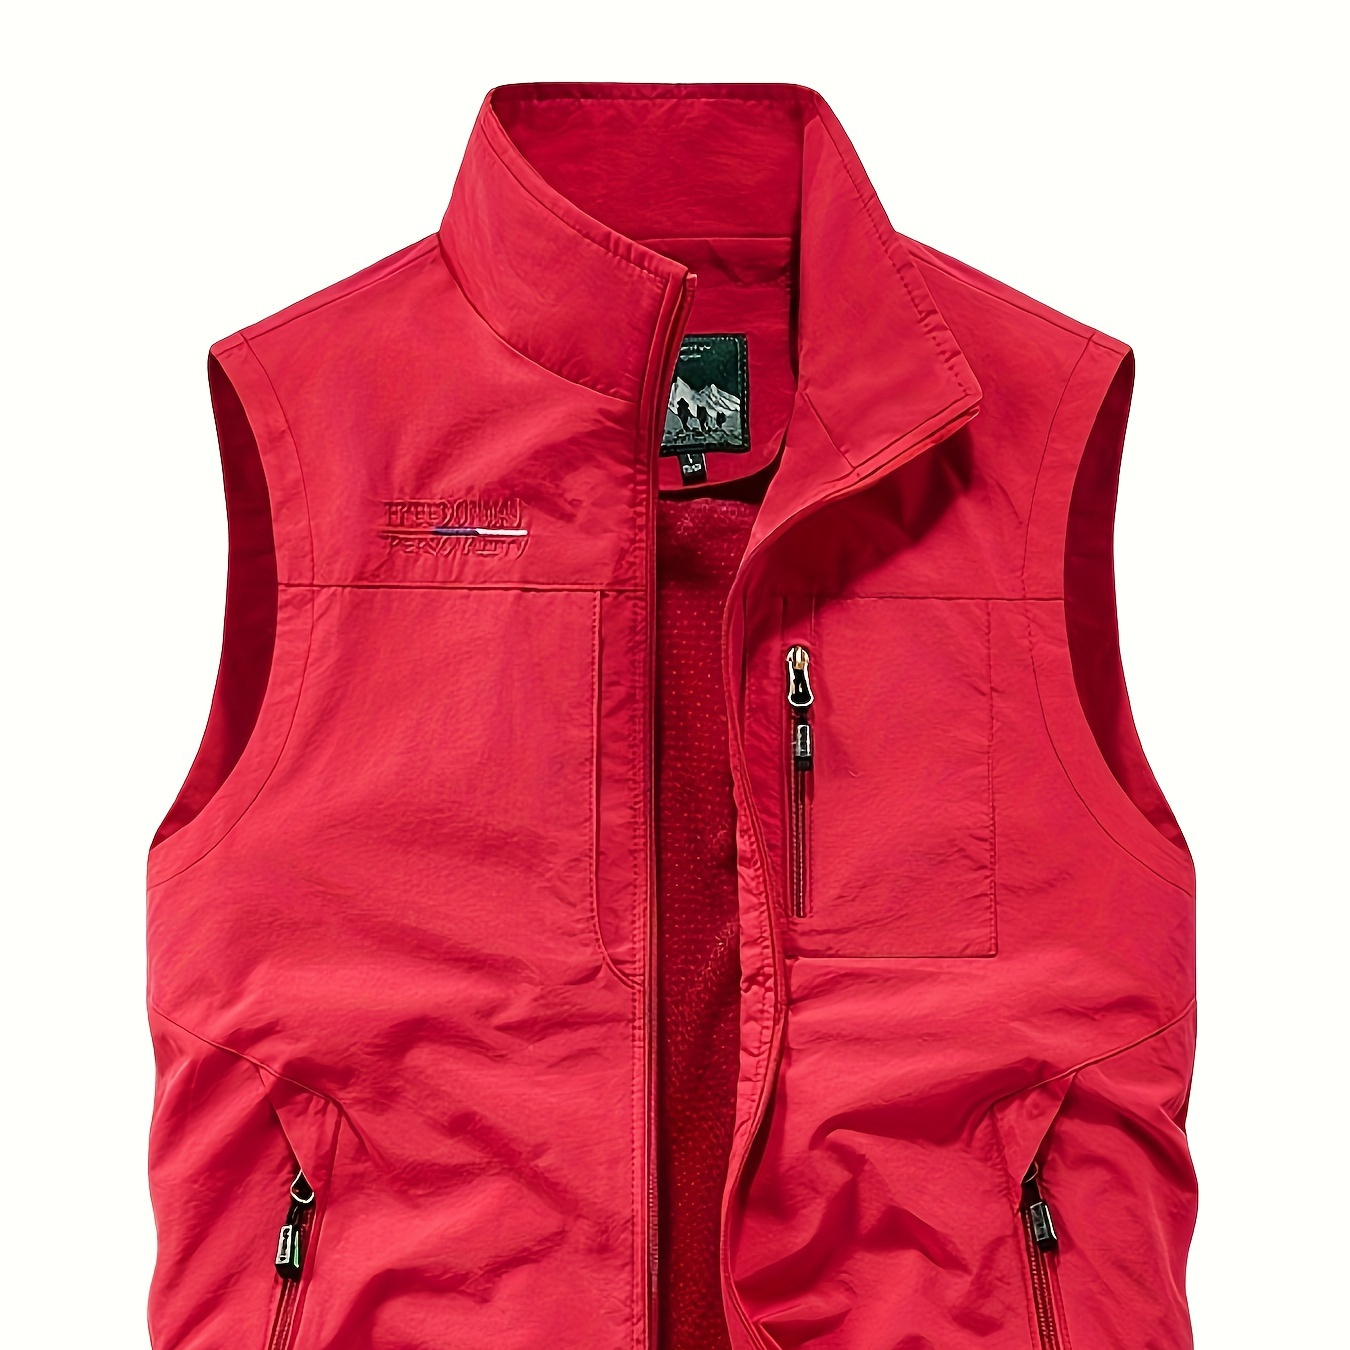 

Zipper Pockets Cargo Vest, Men's Casual Outwear Stand Collar Zip Up Vest For Spring Summer Outdoor Fishing Photography